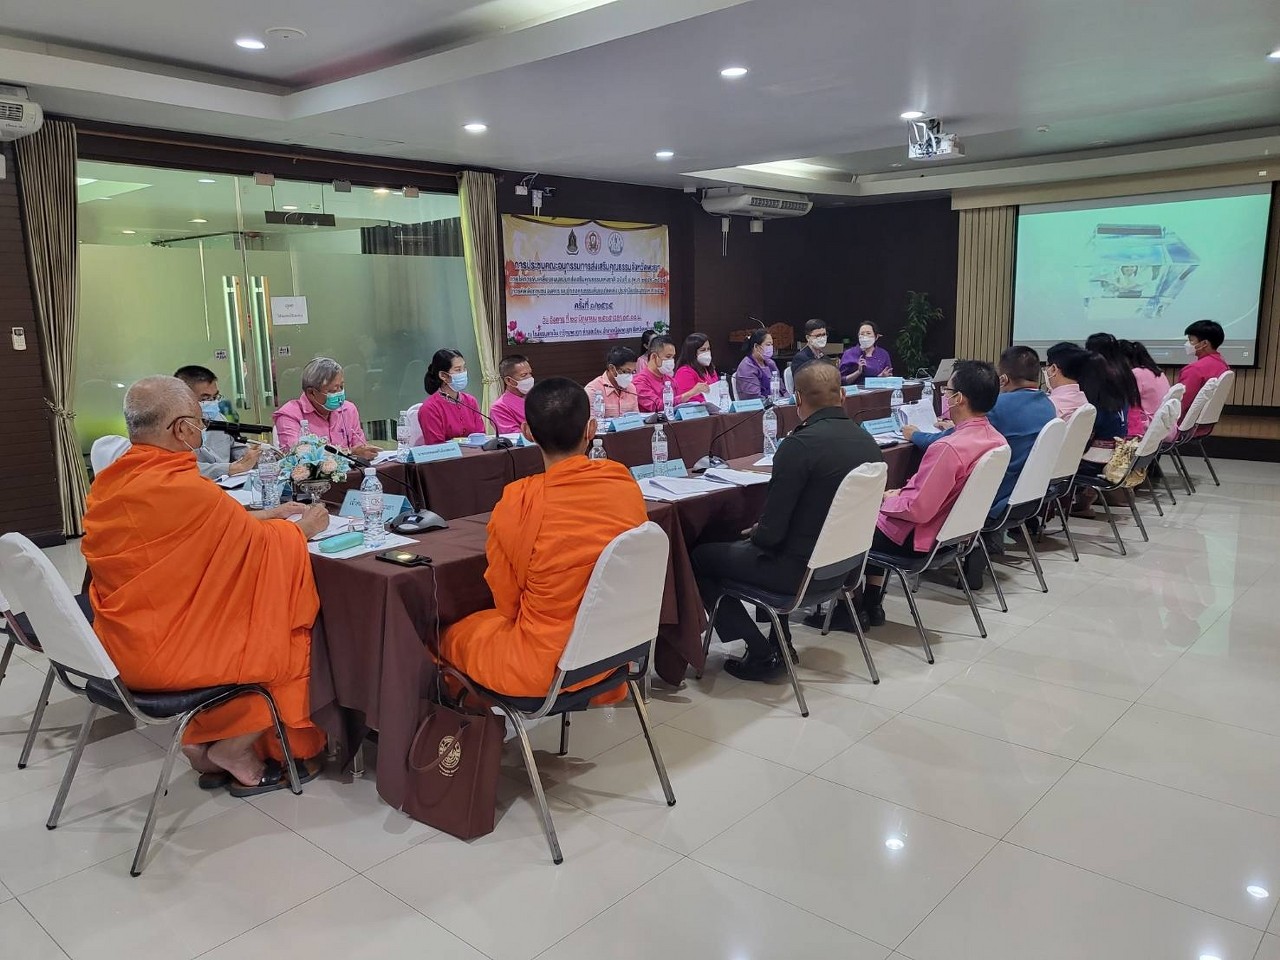 University of Phayao Participate in presentations to be selected as communities, organizations and districts with outstanding model virtues, Phayao Province, fiscal year 2022.